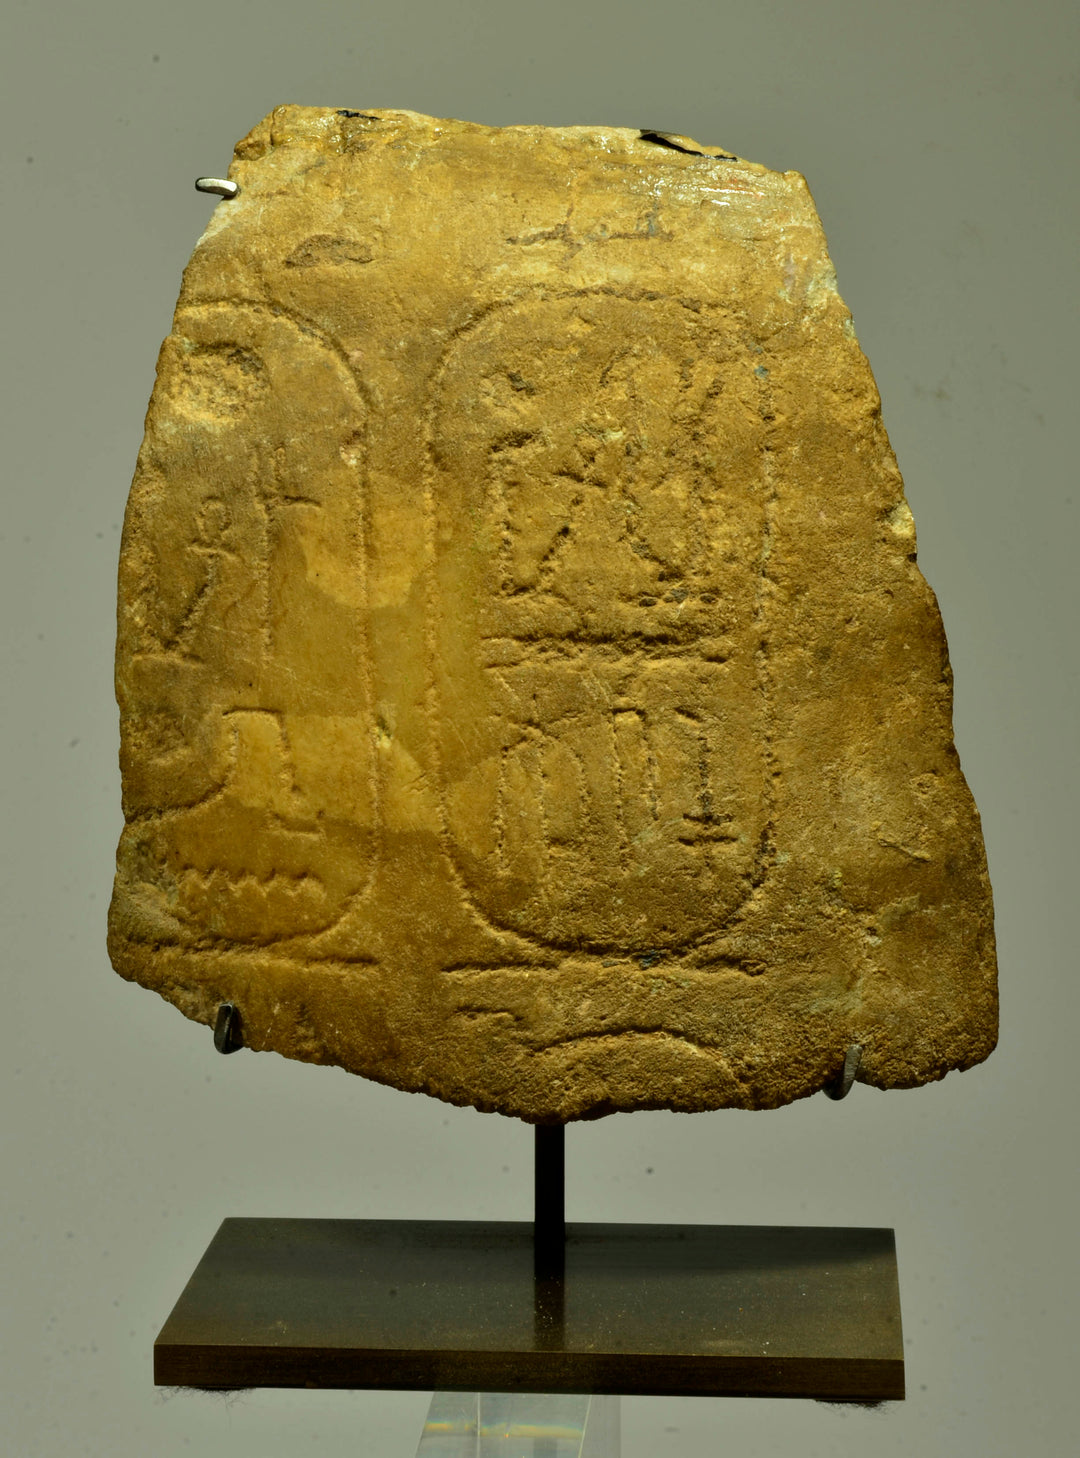 Egyptian Alabaster Jar Fragment with the Cartouches of Ramesses II